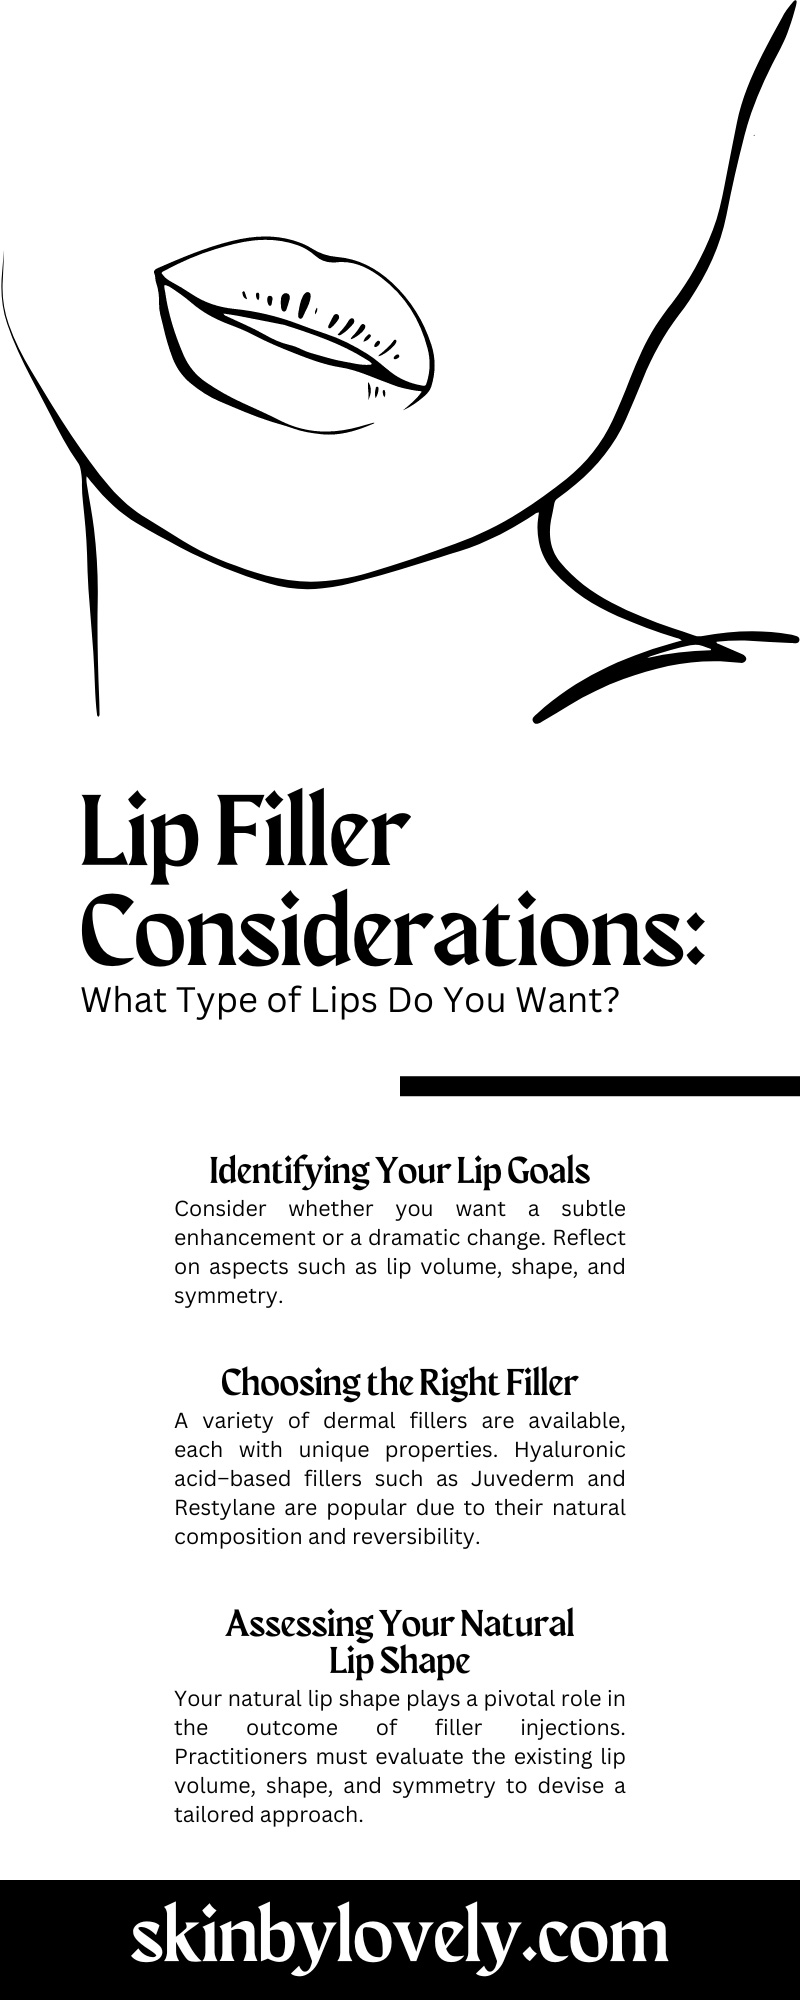 Lip Filler Considerations: What Type of Lips Do You Want?